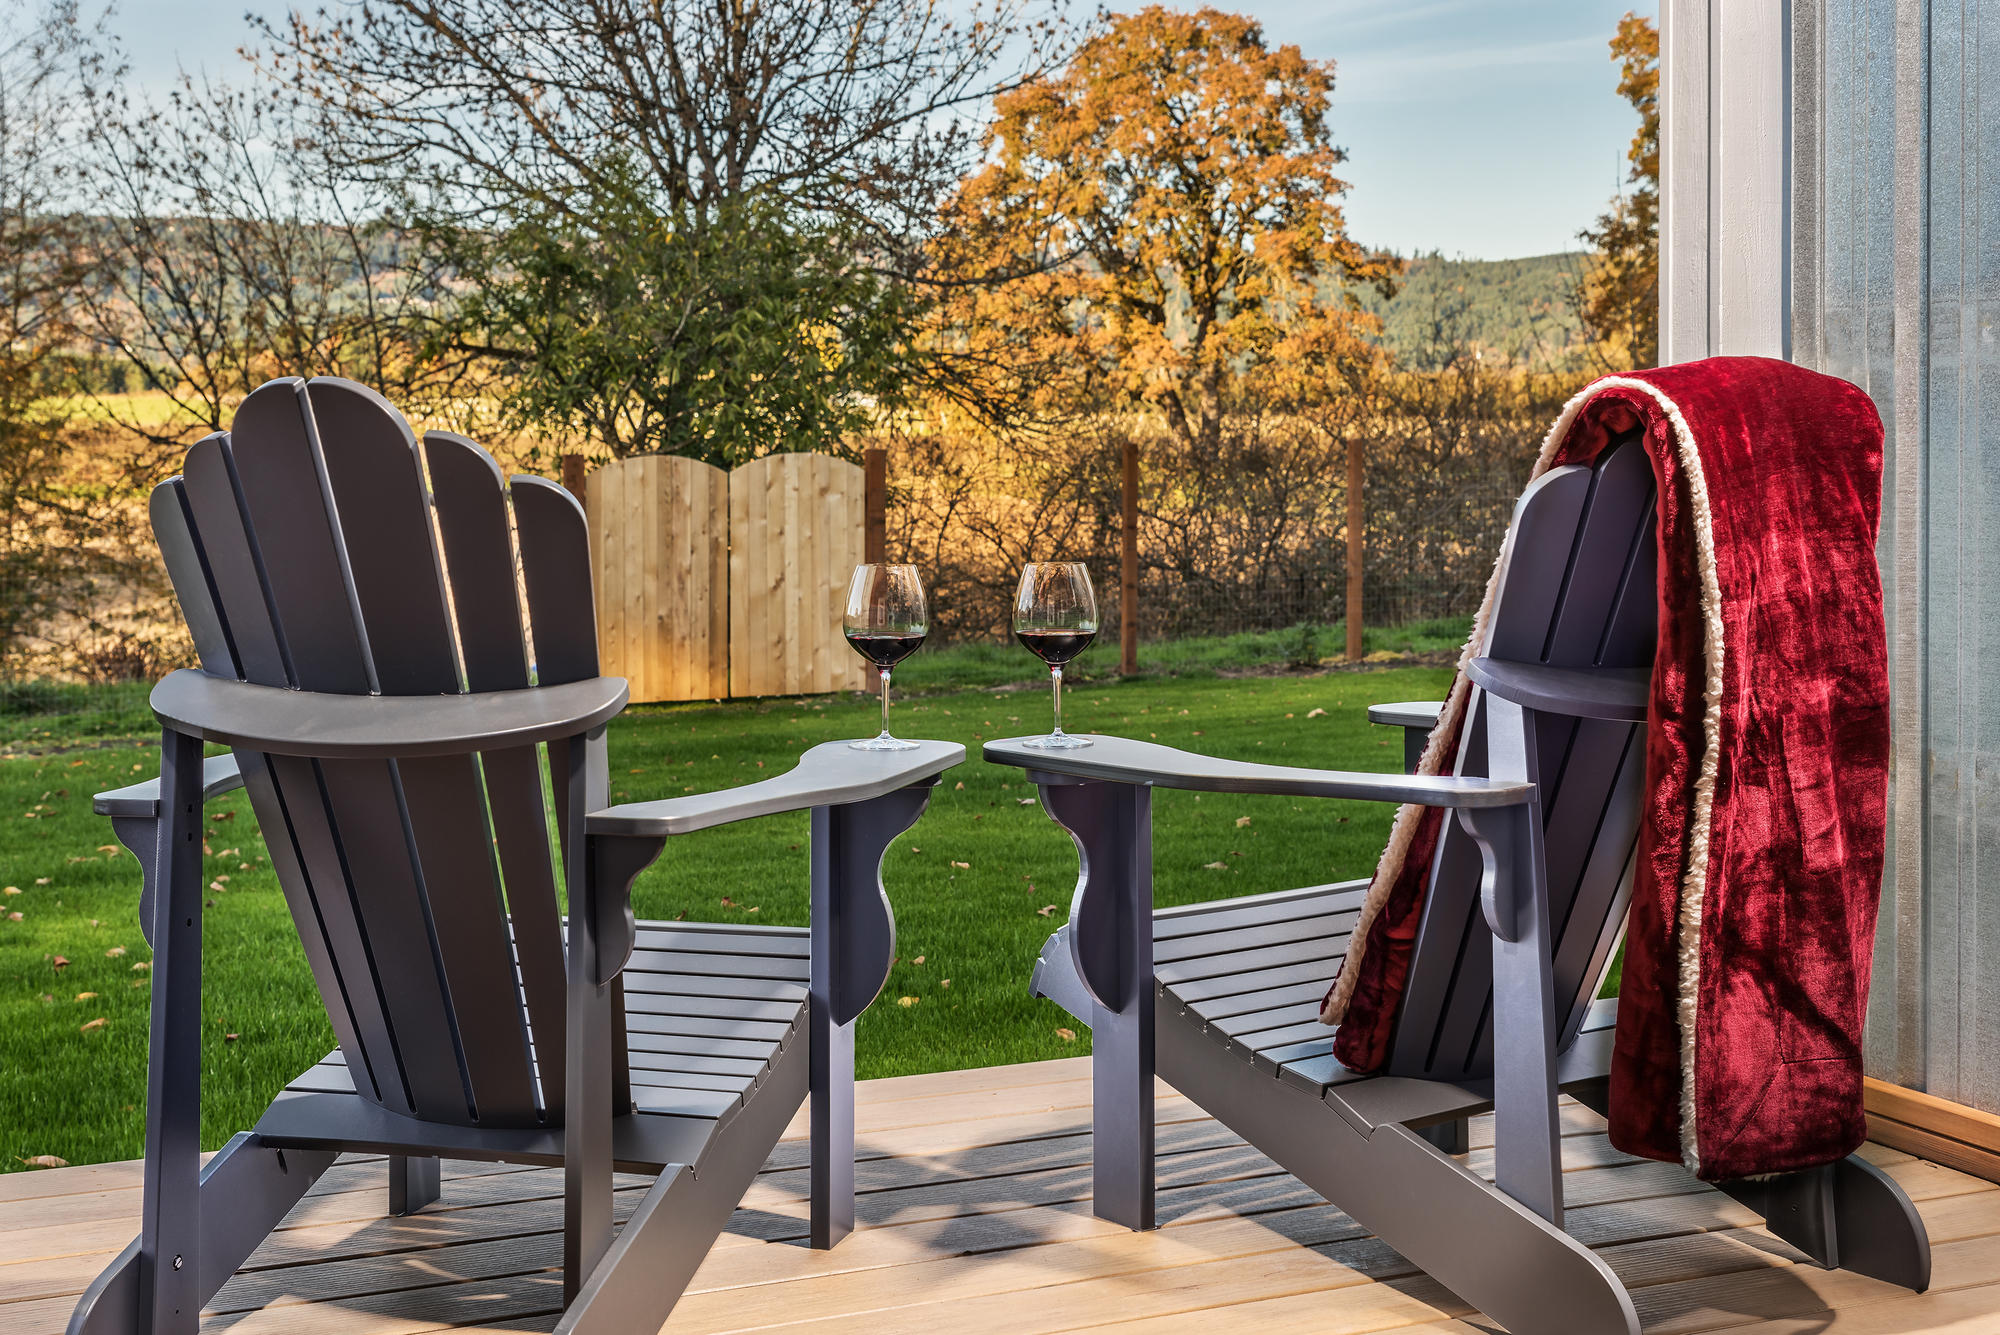 Two blue Adirondack chairs with glasses of red wine on a deck by a green lawn.